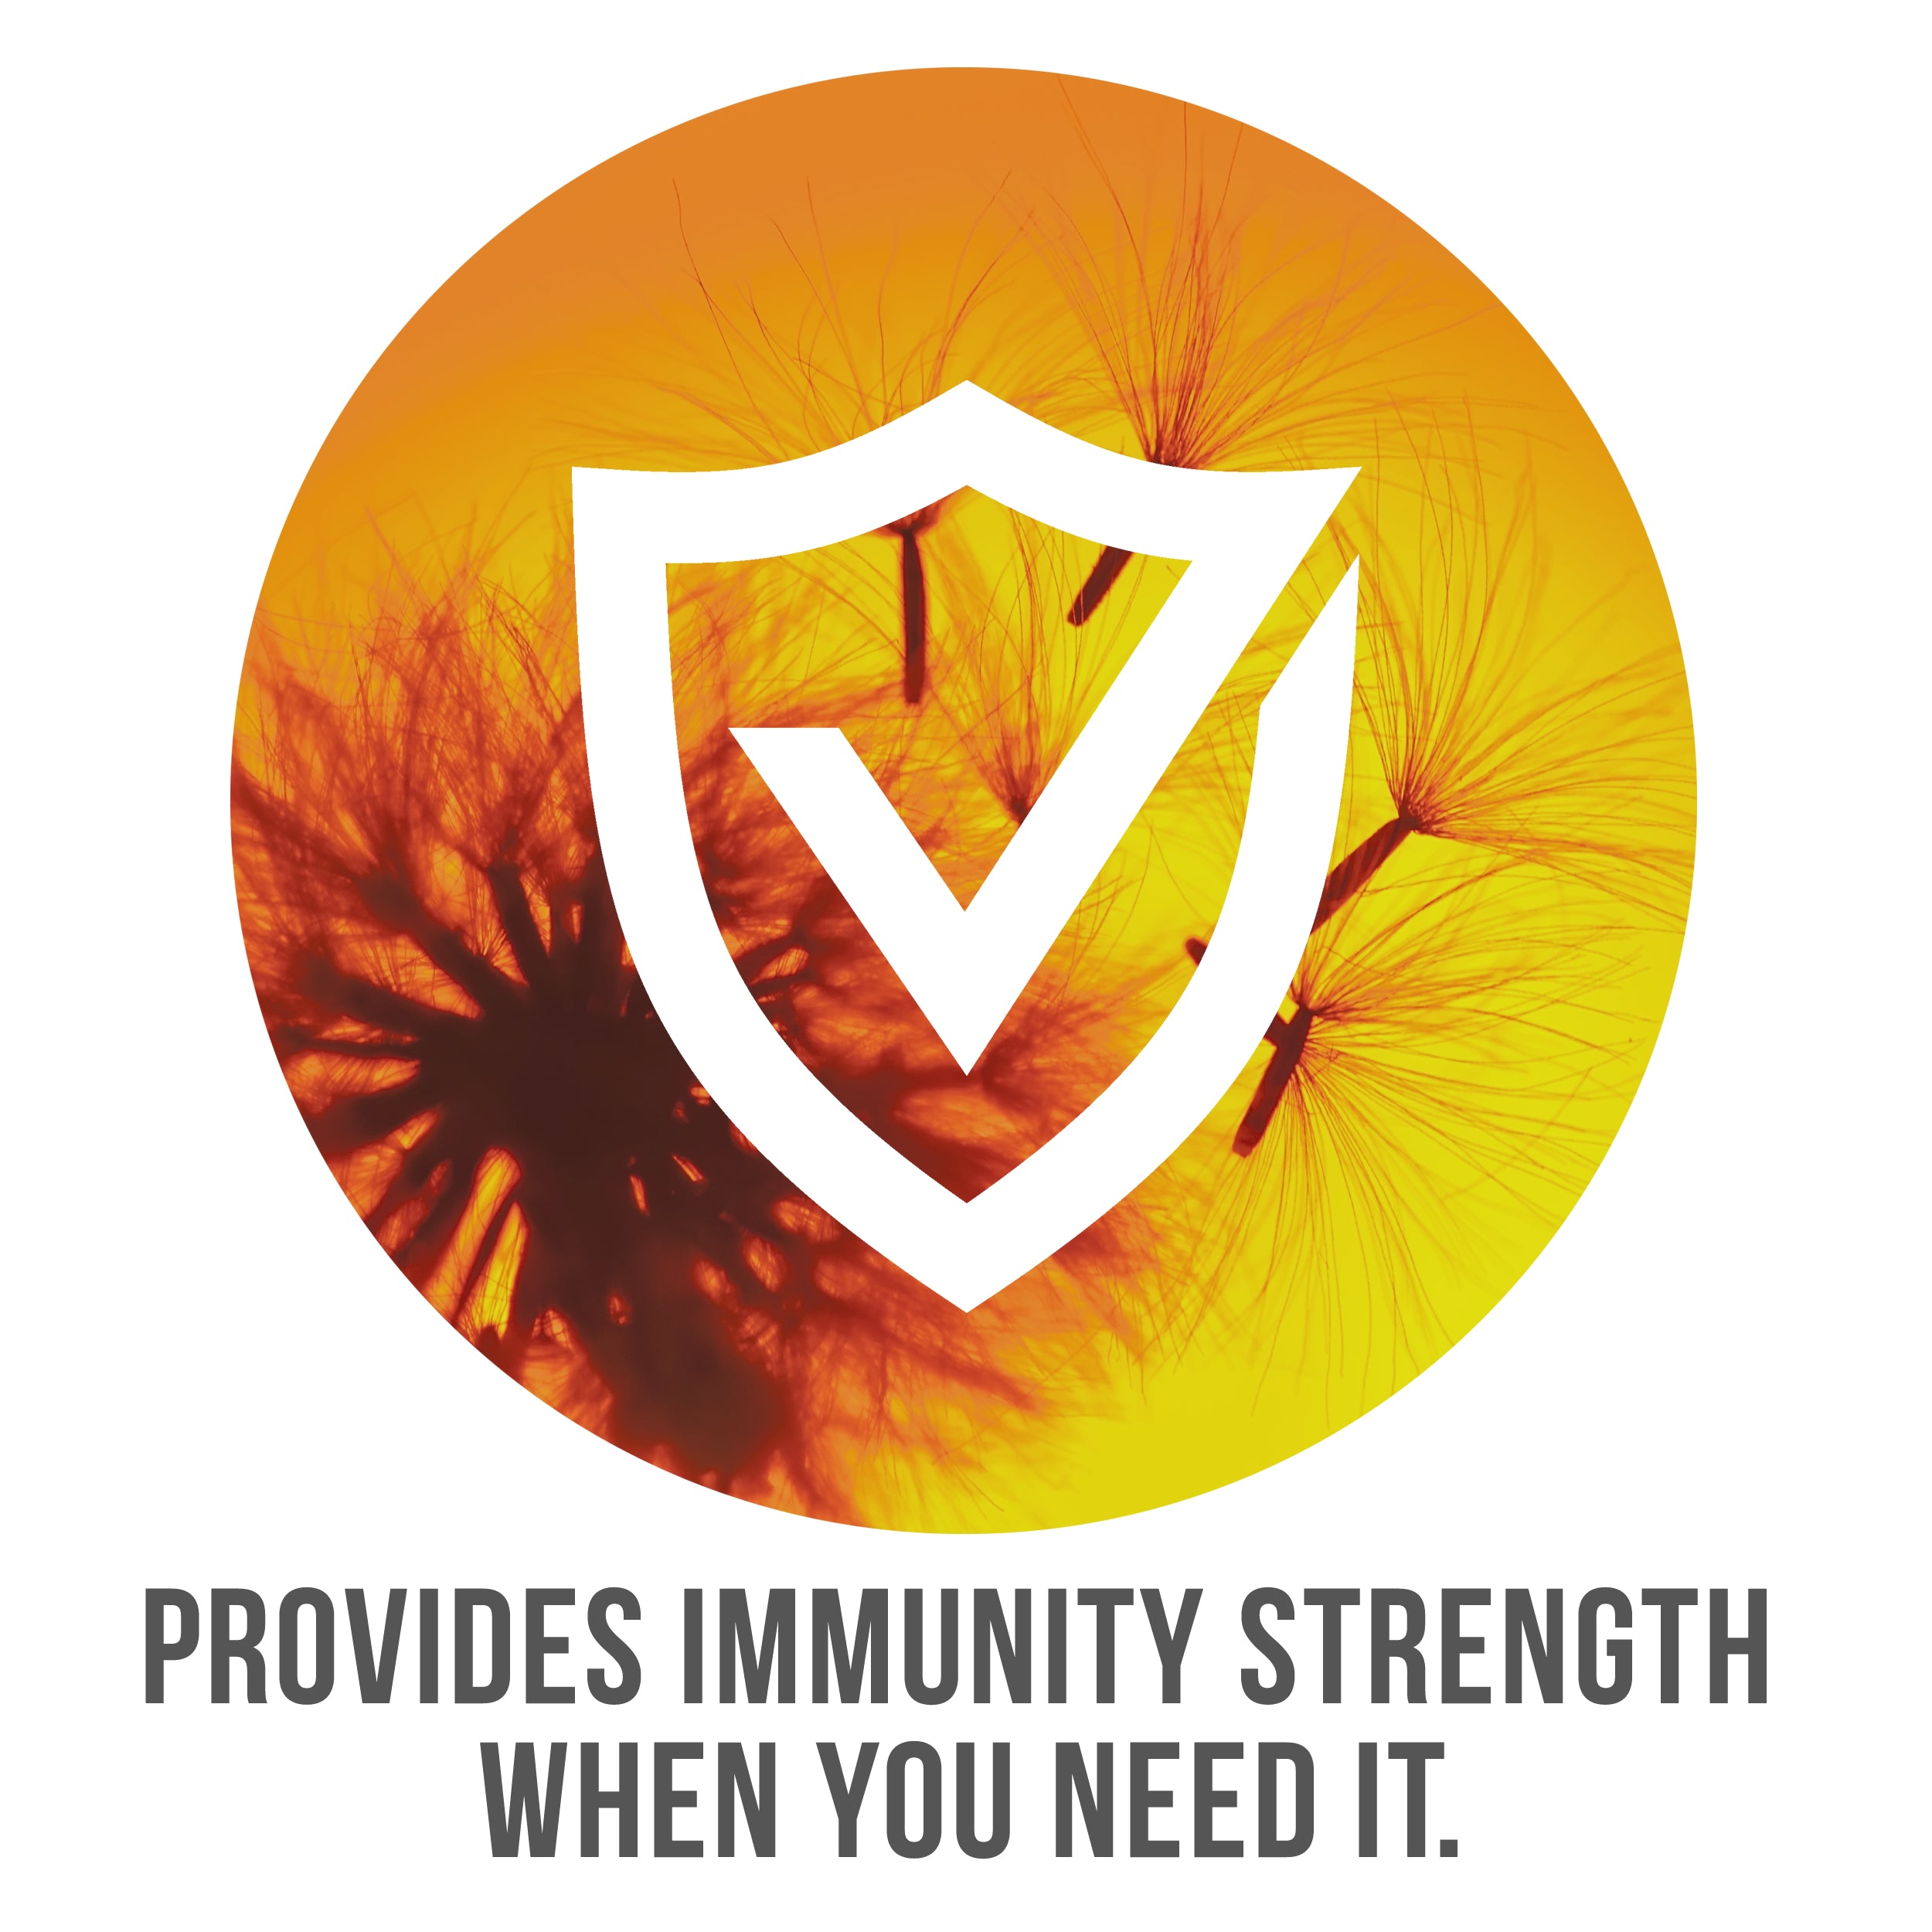 provides Immunity and Strength when you need it